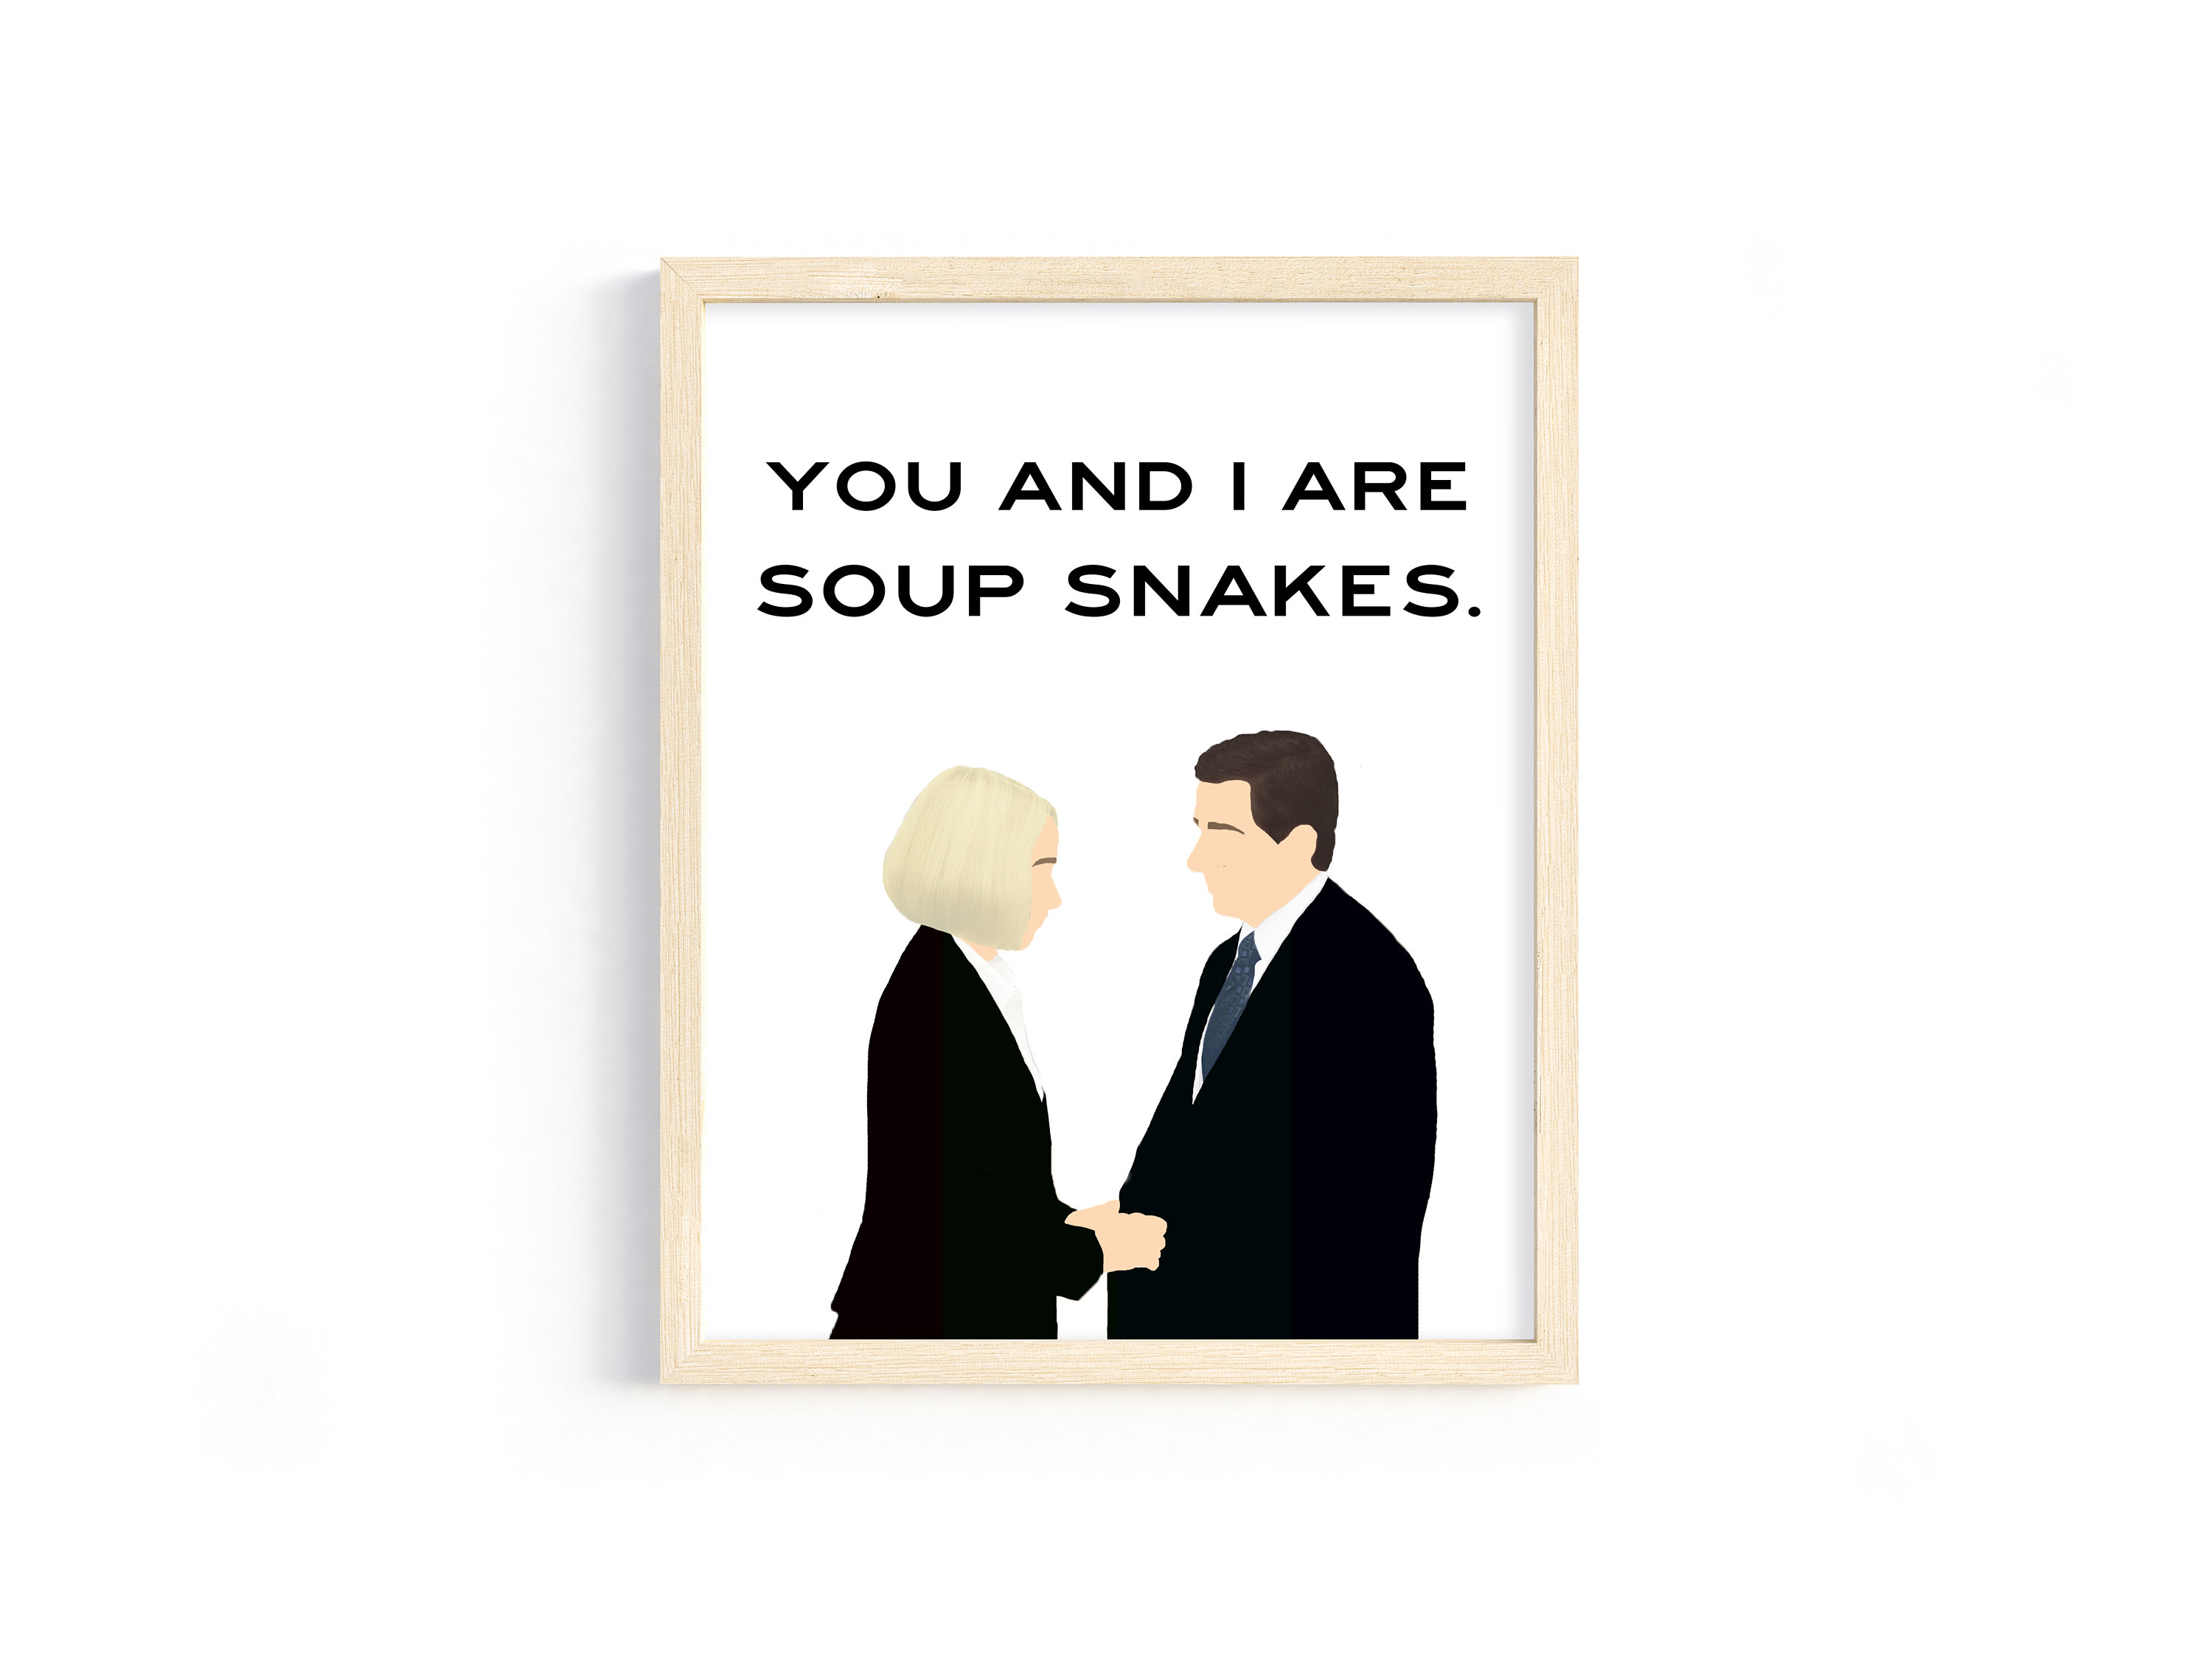 The Office Love Quotes Pam and Jim Michael and Holly - Etsy Hong Kong